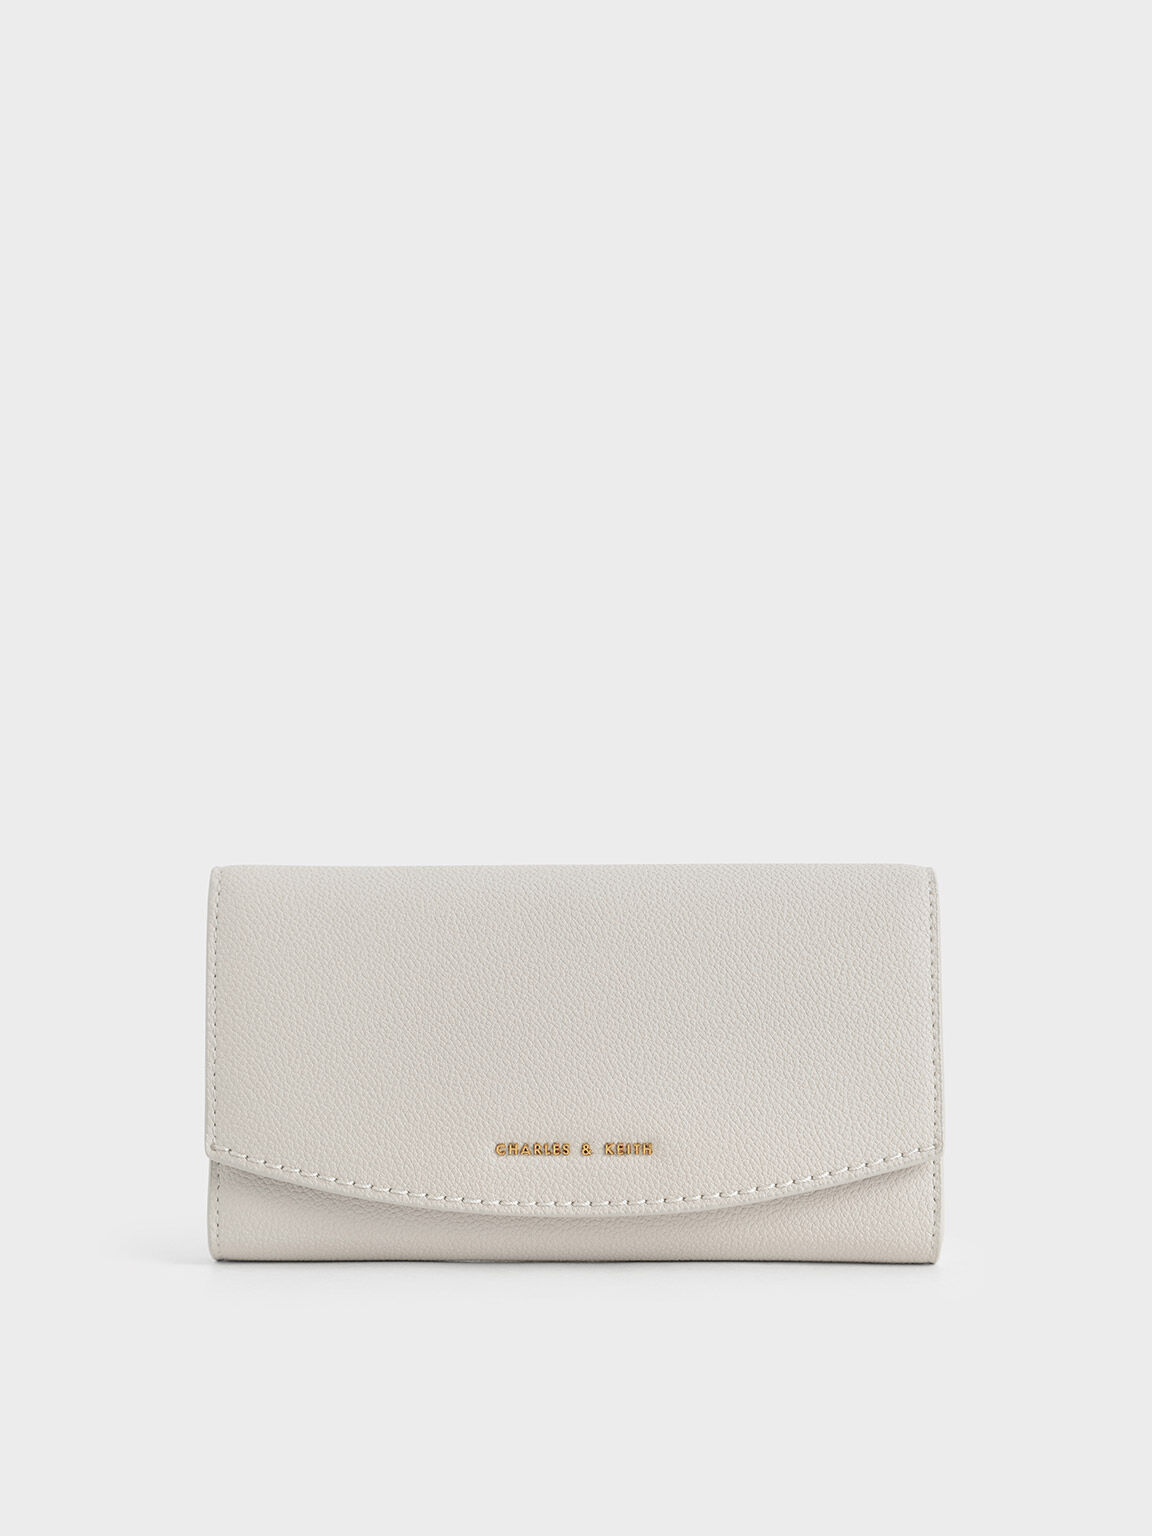 Page 2 | Women's Wallets | Shop Exclusive Styles | CHARLES & KEITH PH